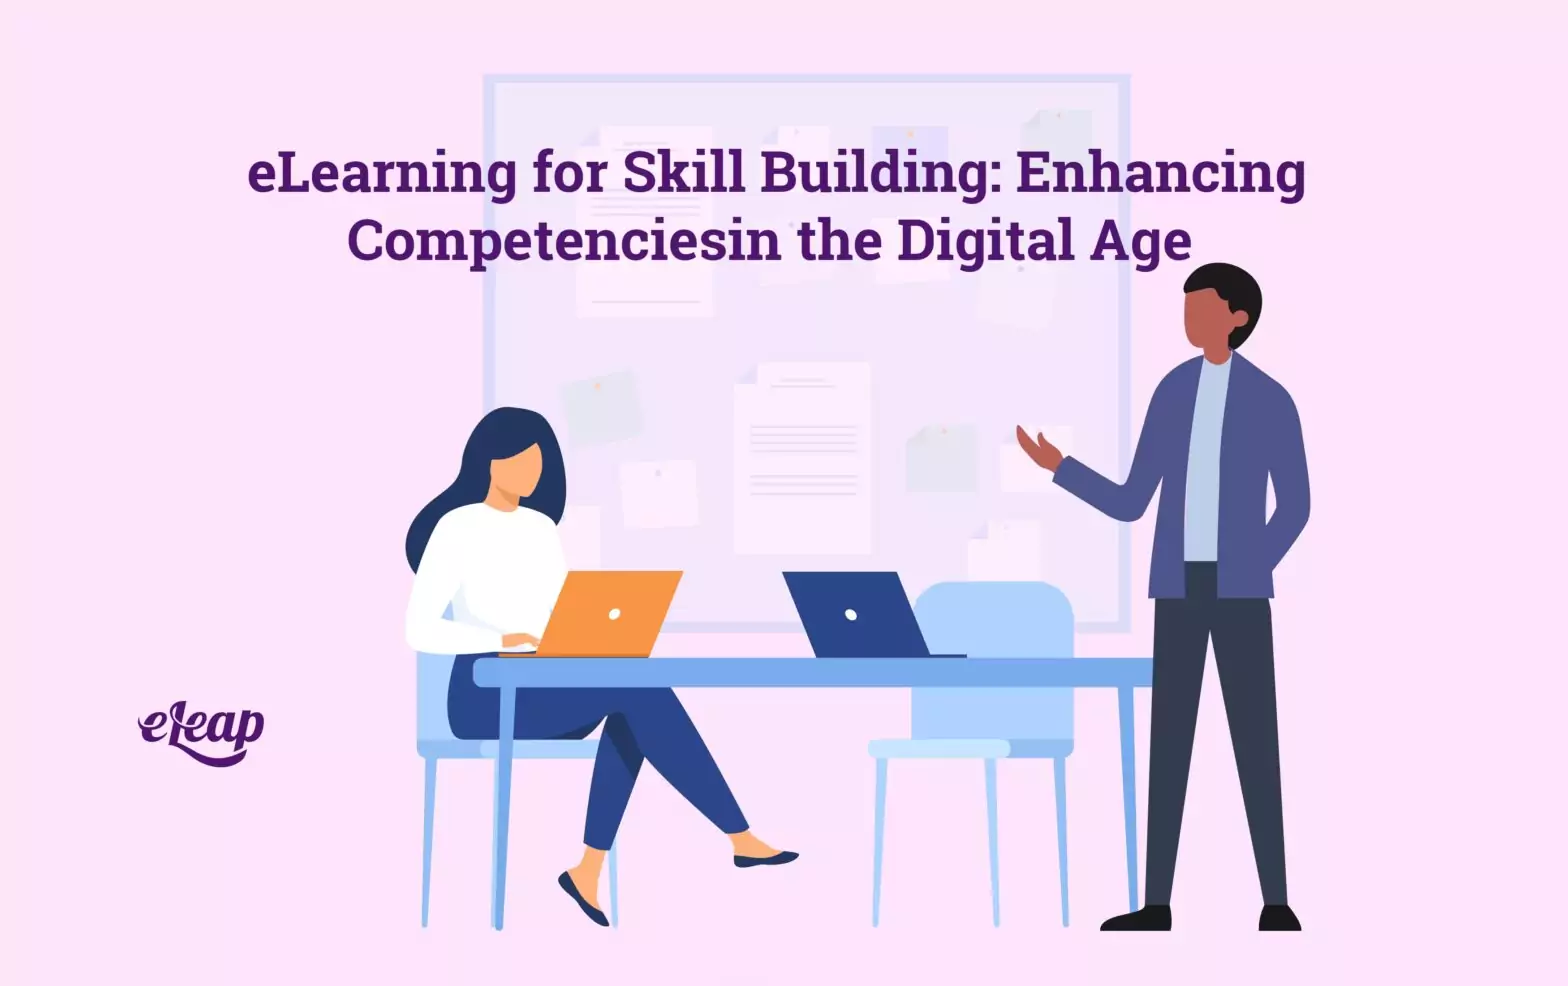 eLearning for Skill Building: Enhancing Competencies in the Digital Age